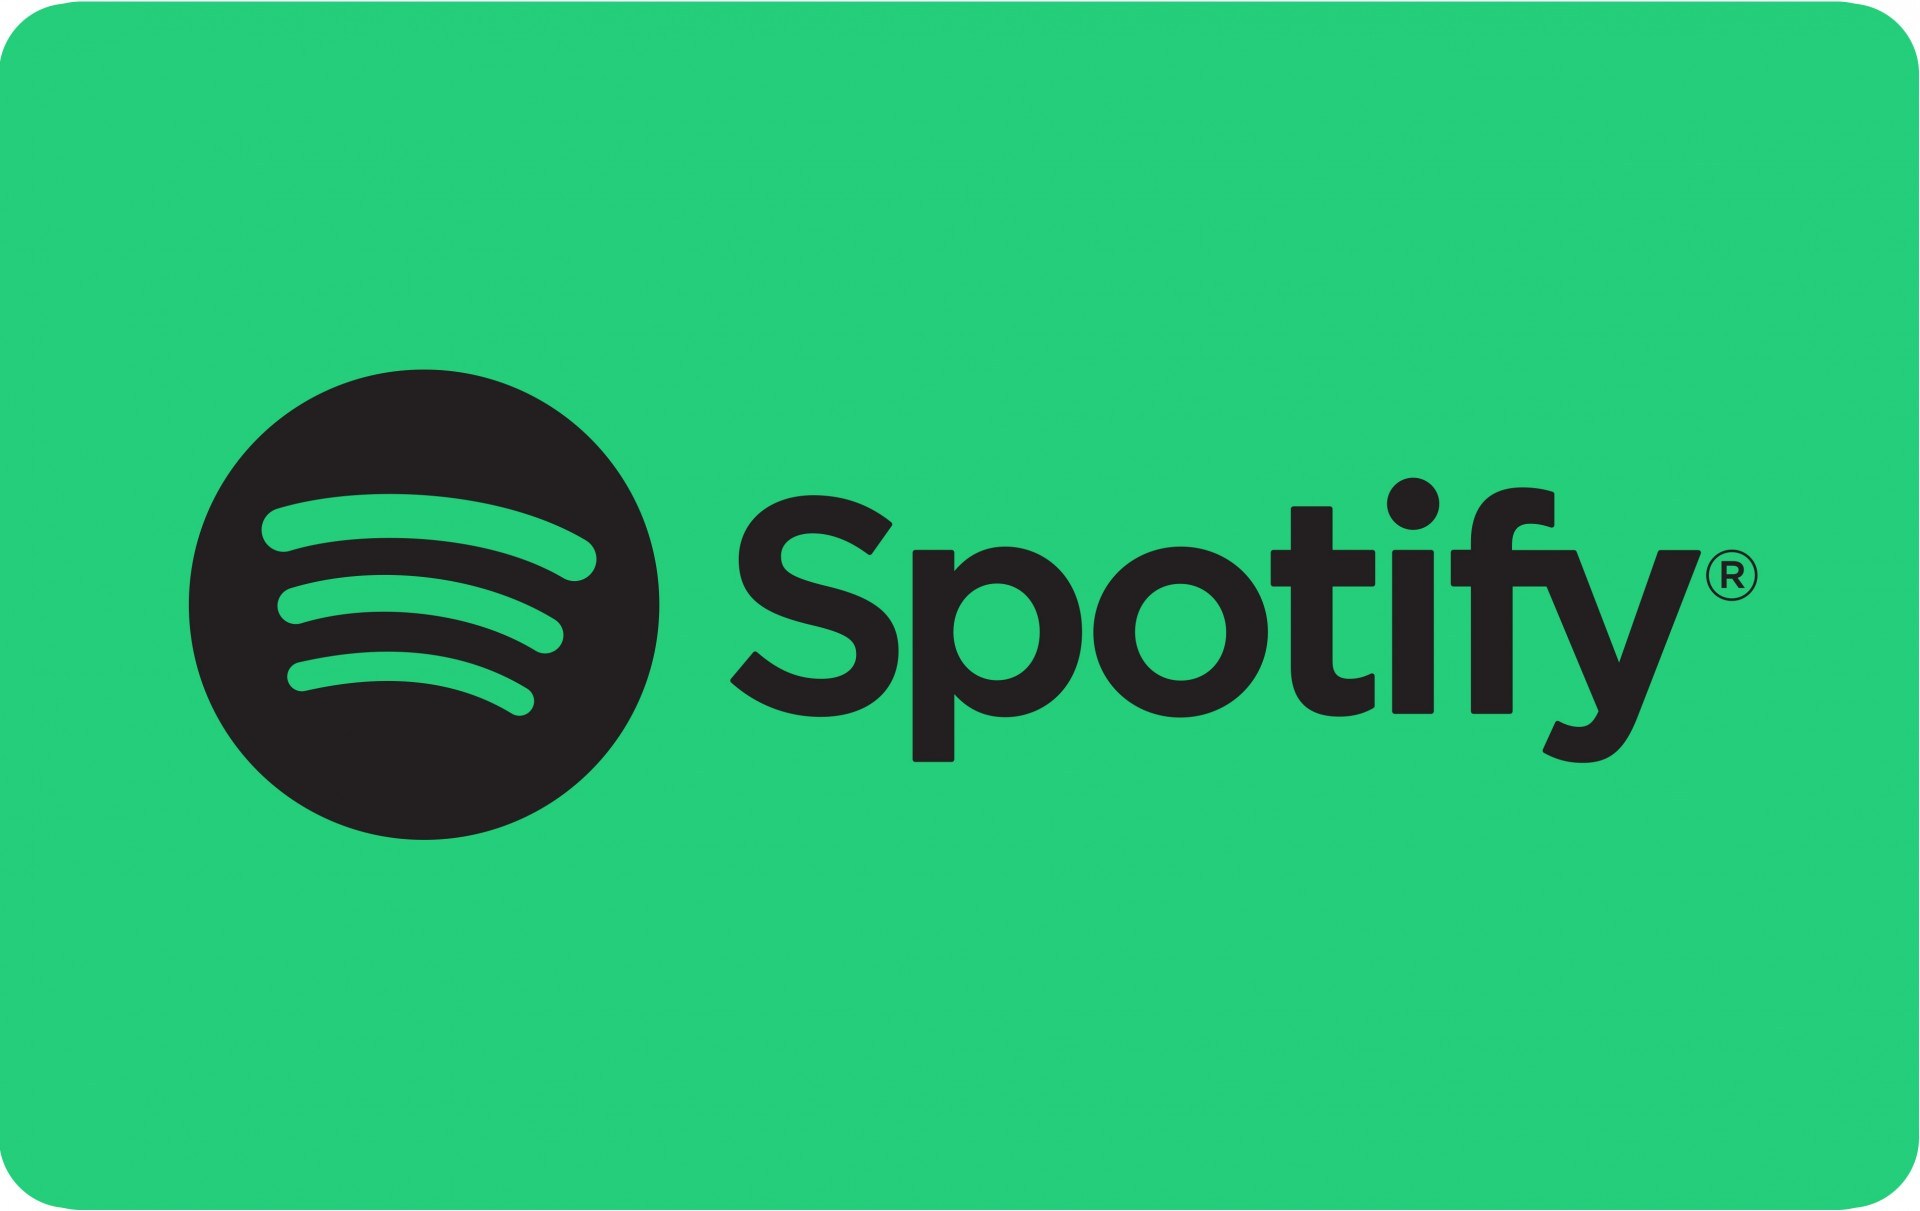 Spotify Buys Megaphone for $235 million – Who is Losing Out? Consumers